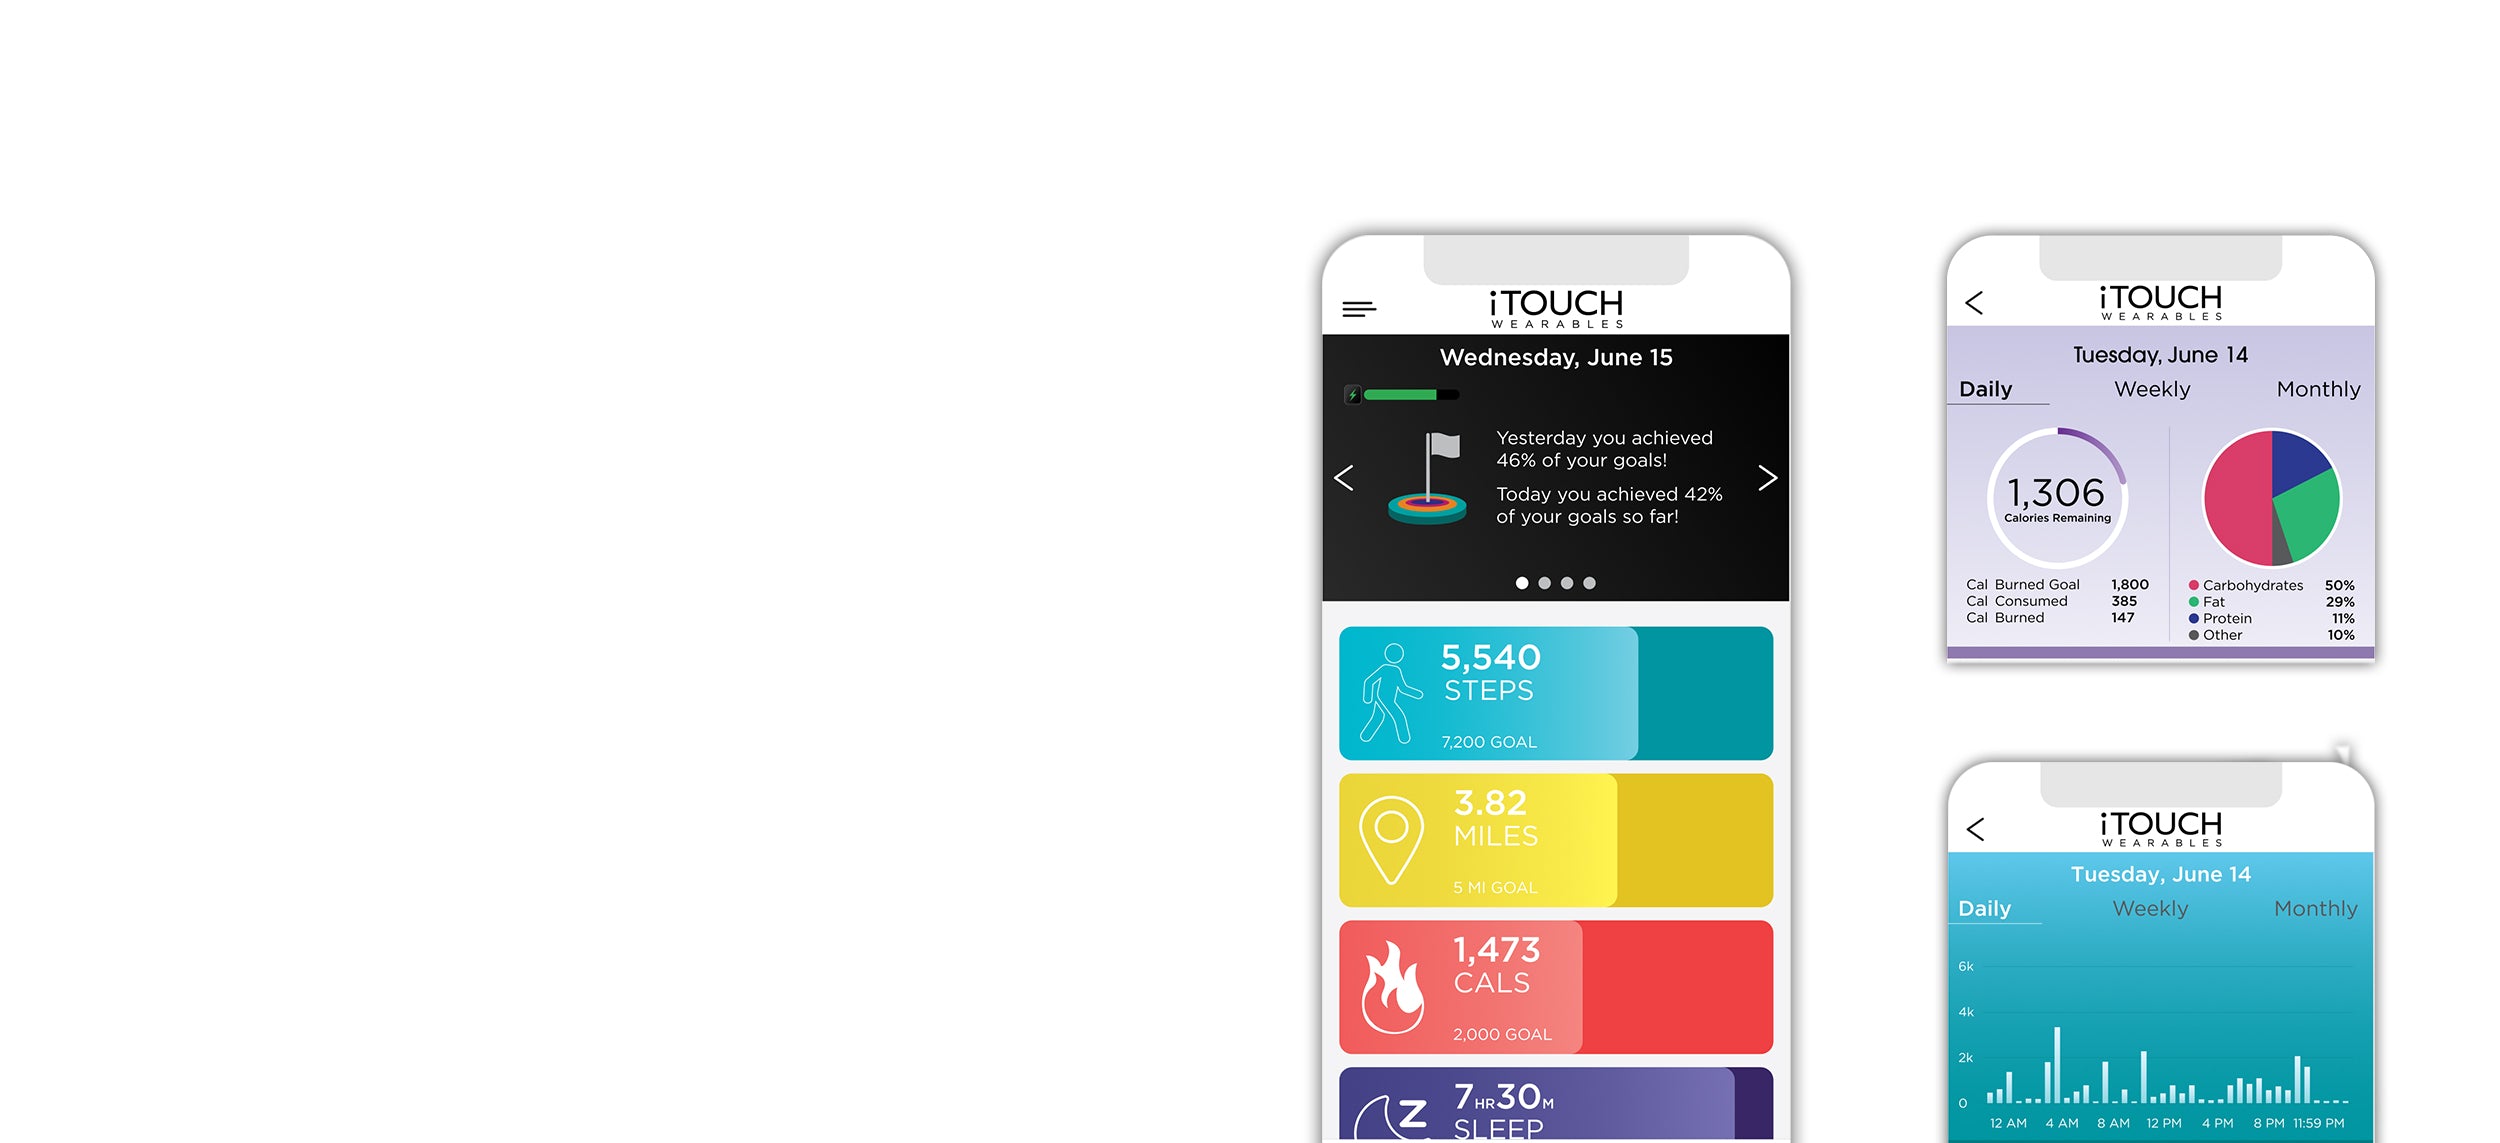 Easy to Use. The iTouch Wearables App